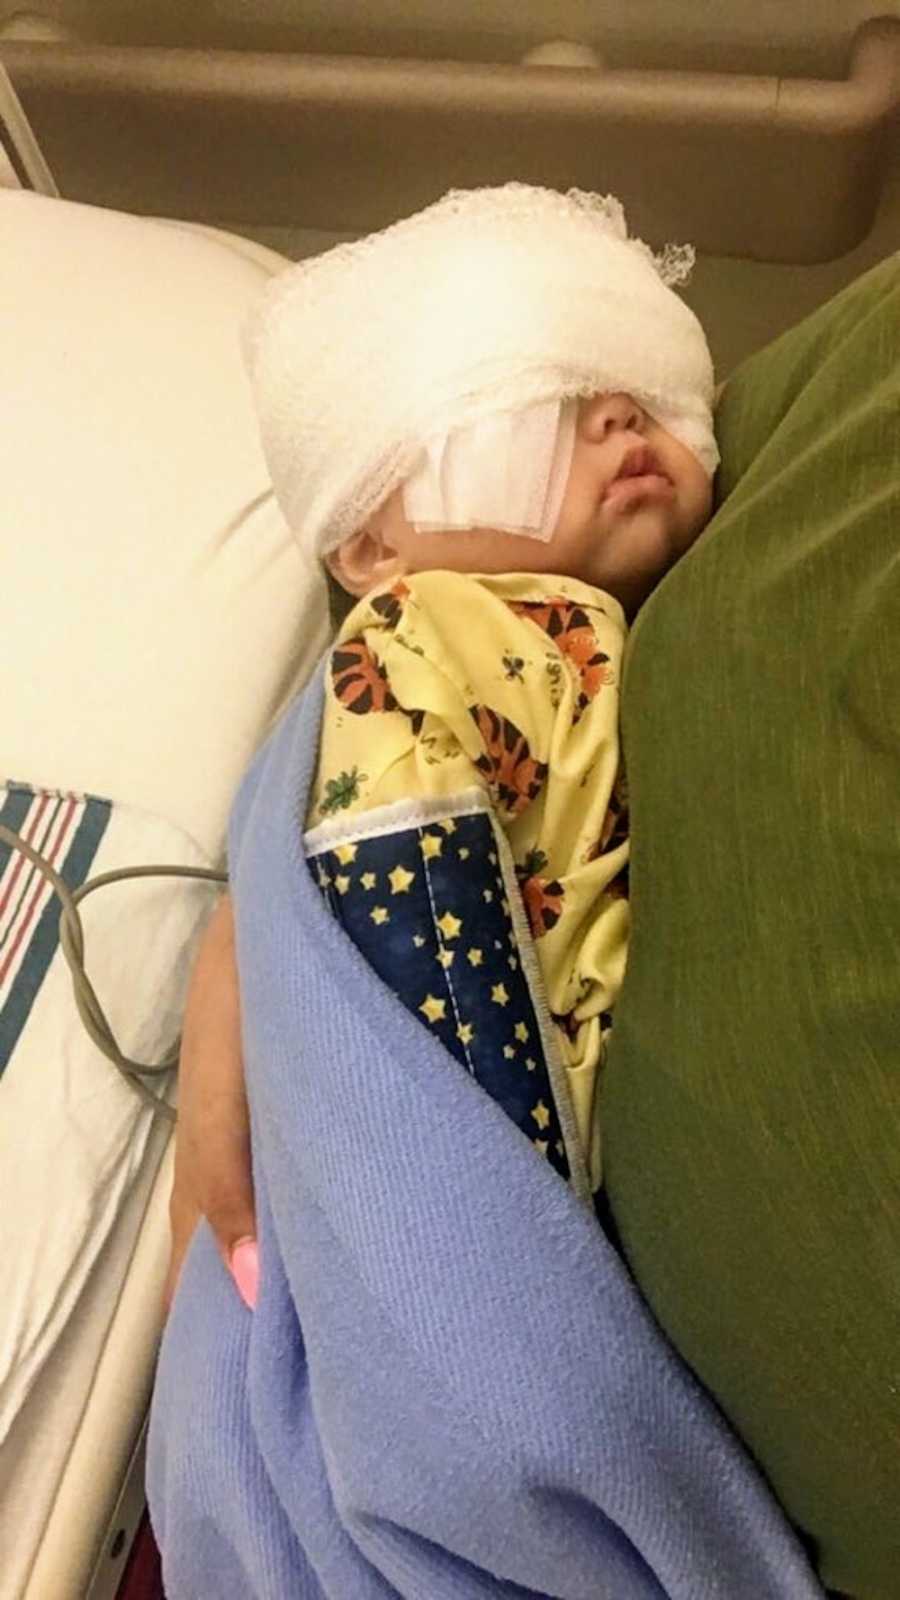 Mother holds infant with Axenfeld-Rieger syndrome in her arms whose eyes are wrapped in bandages